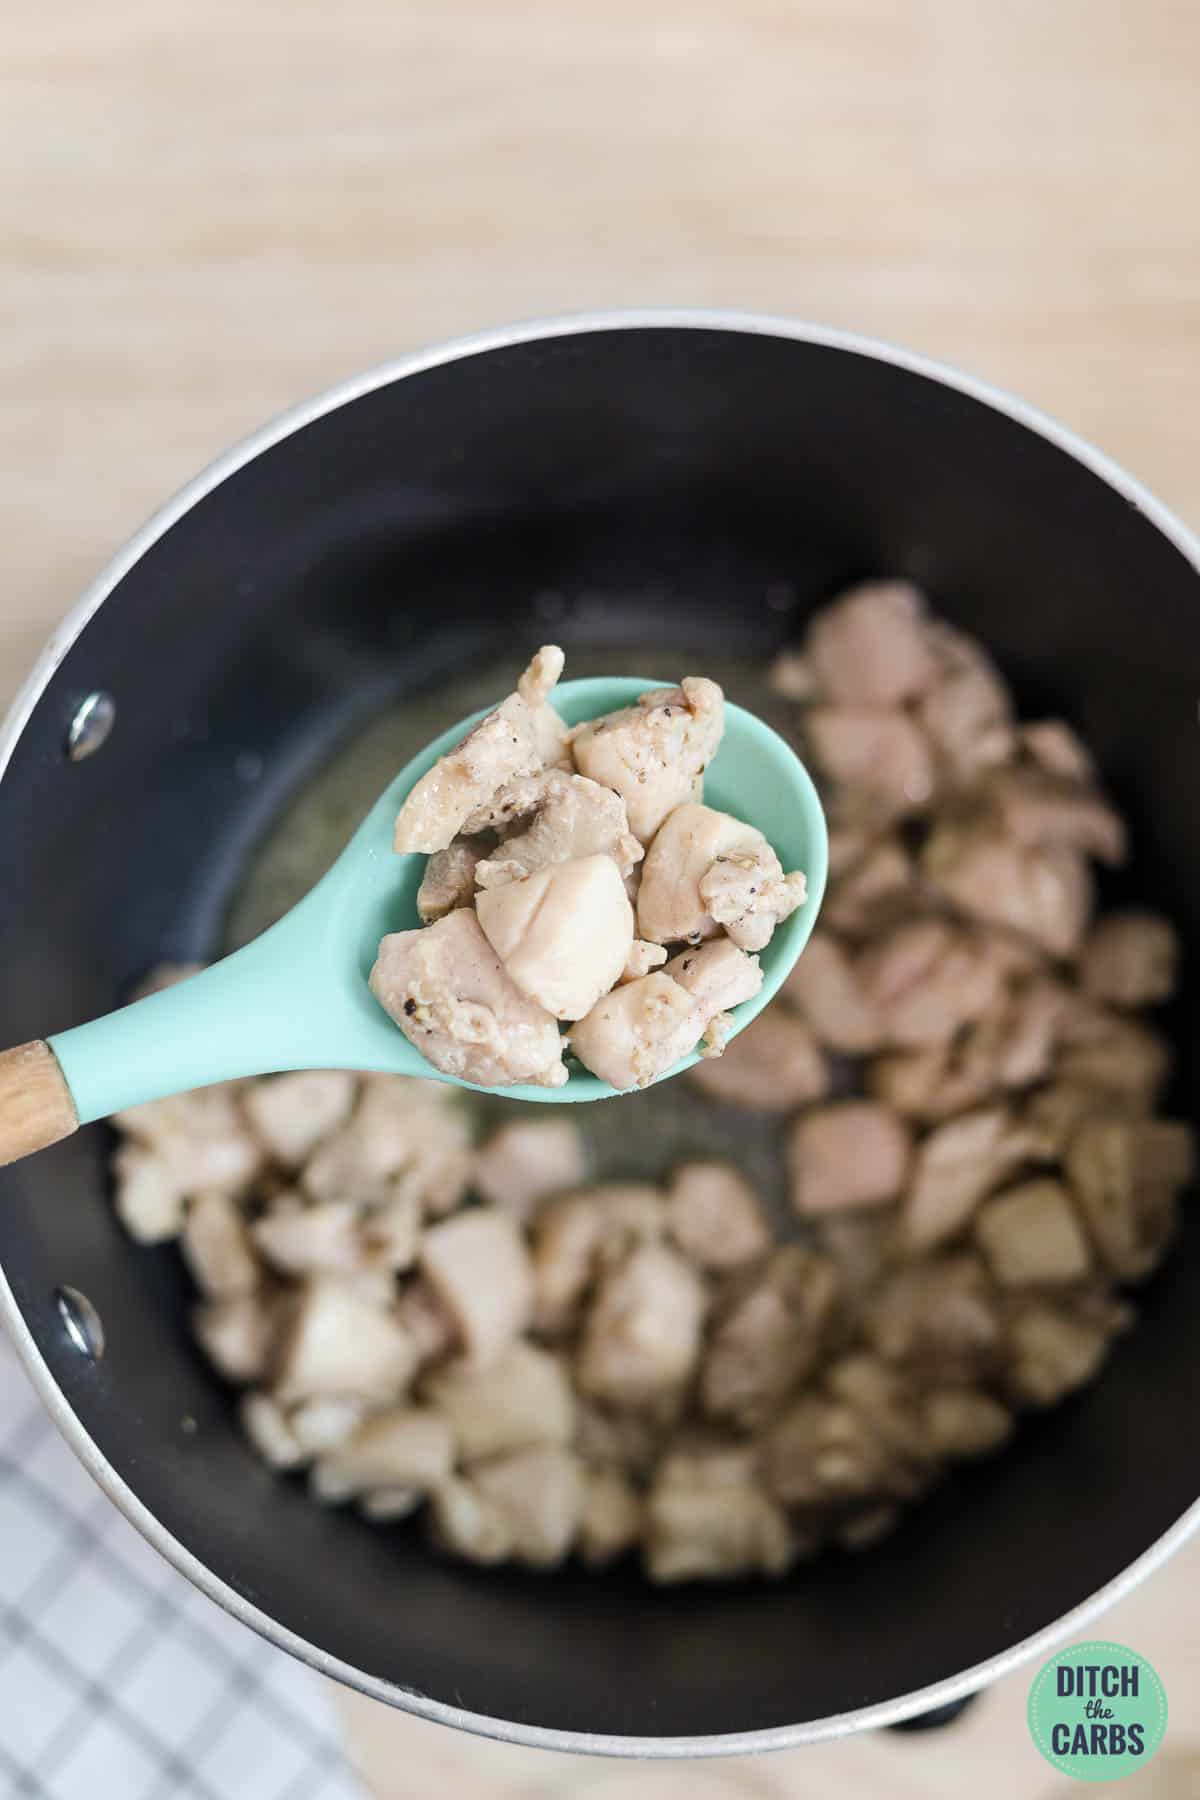 A spoon is removing the cooked diced chicken from the pot to be set aside.